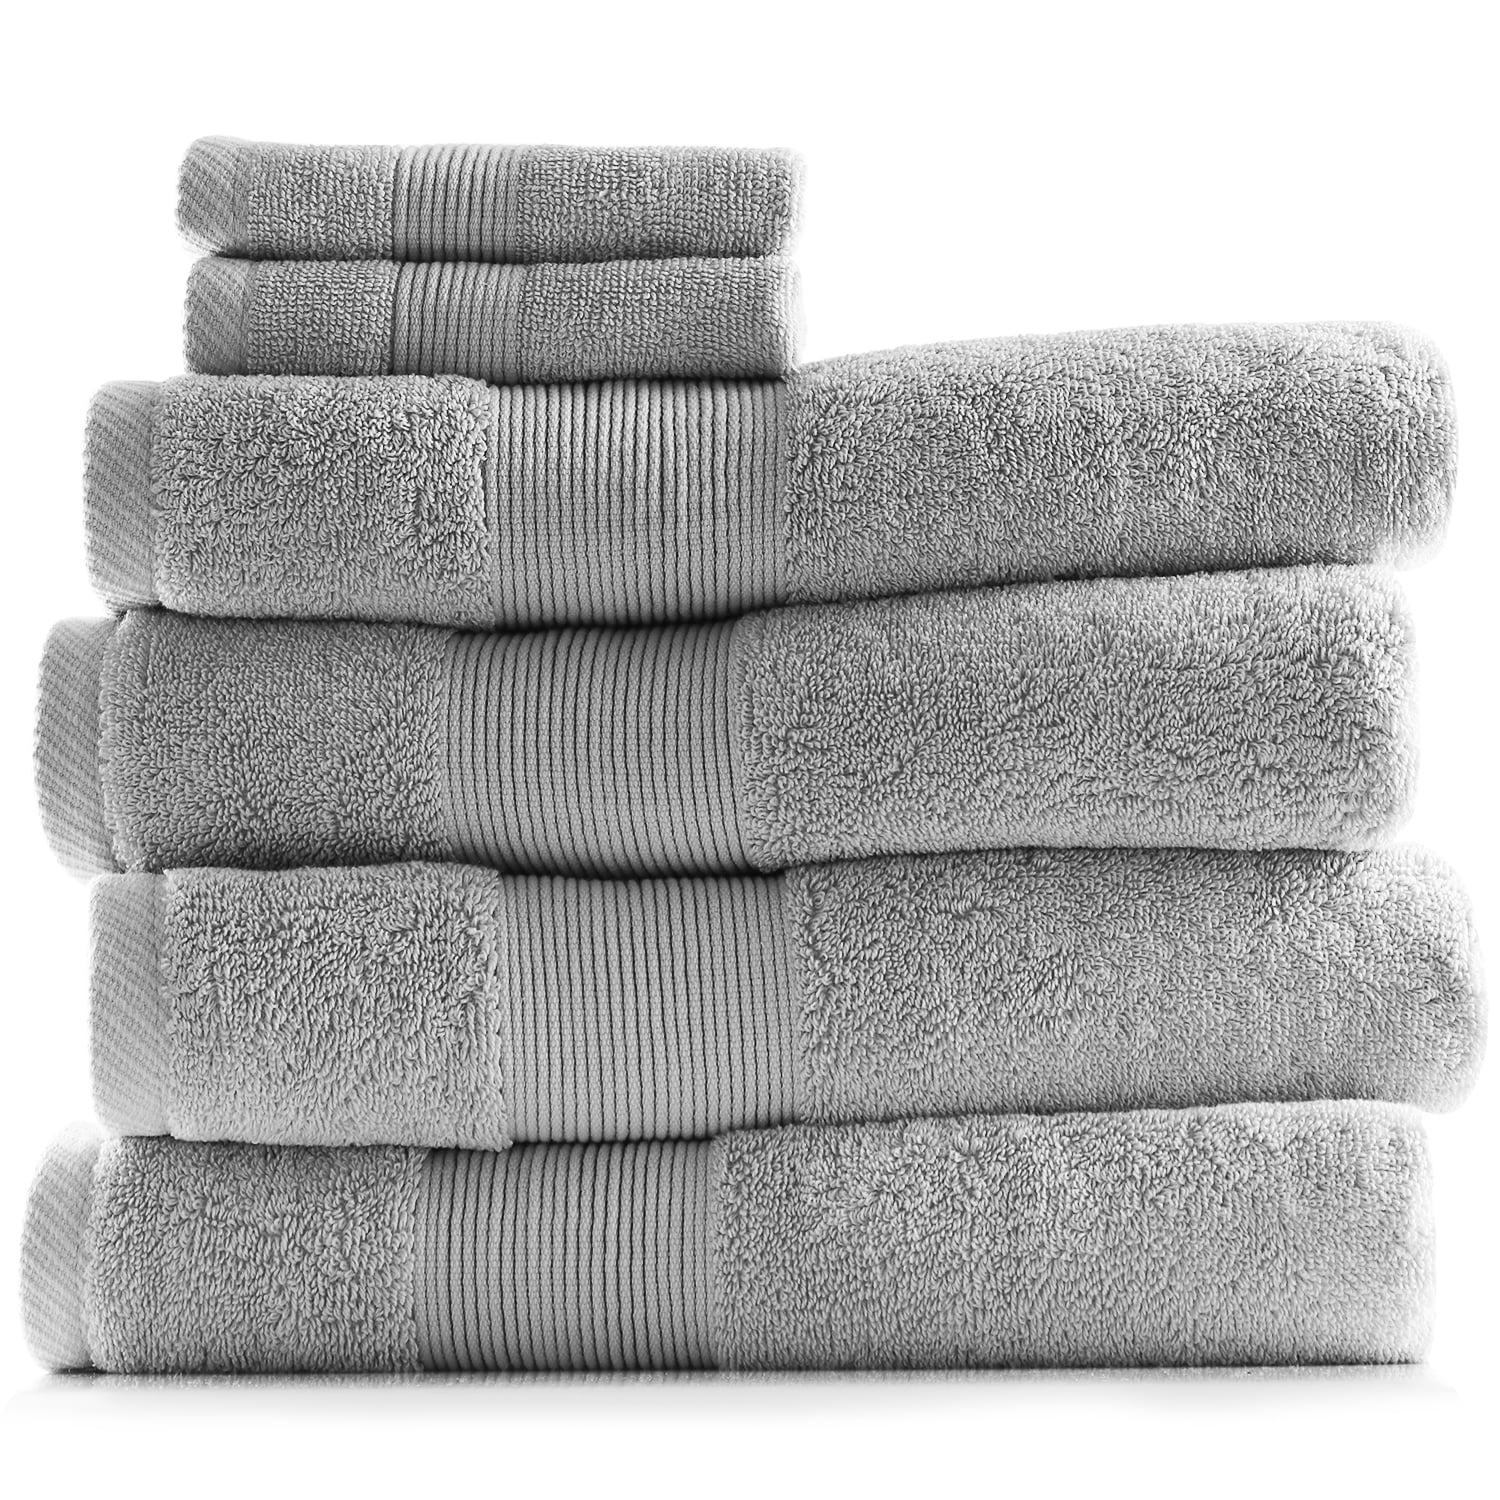 Pack of 2,4,8 or 24 Luxury Bath Sheets 100% Cotton Bathroom Shower Towel Sheets 